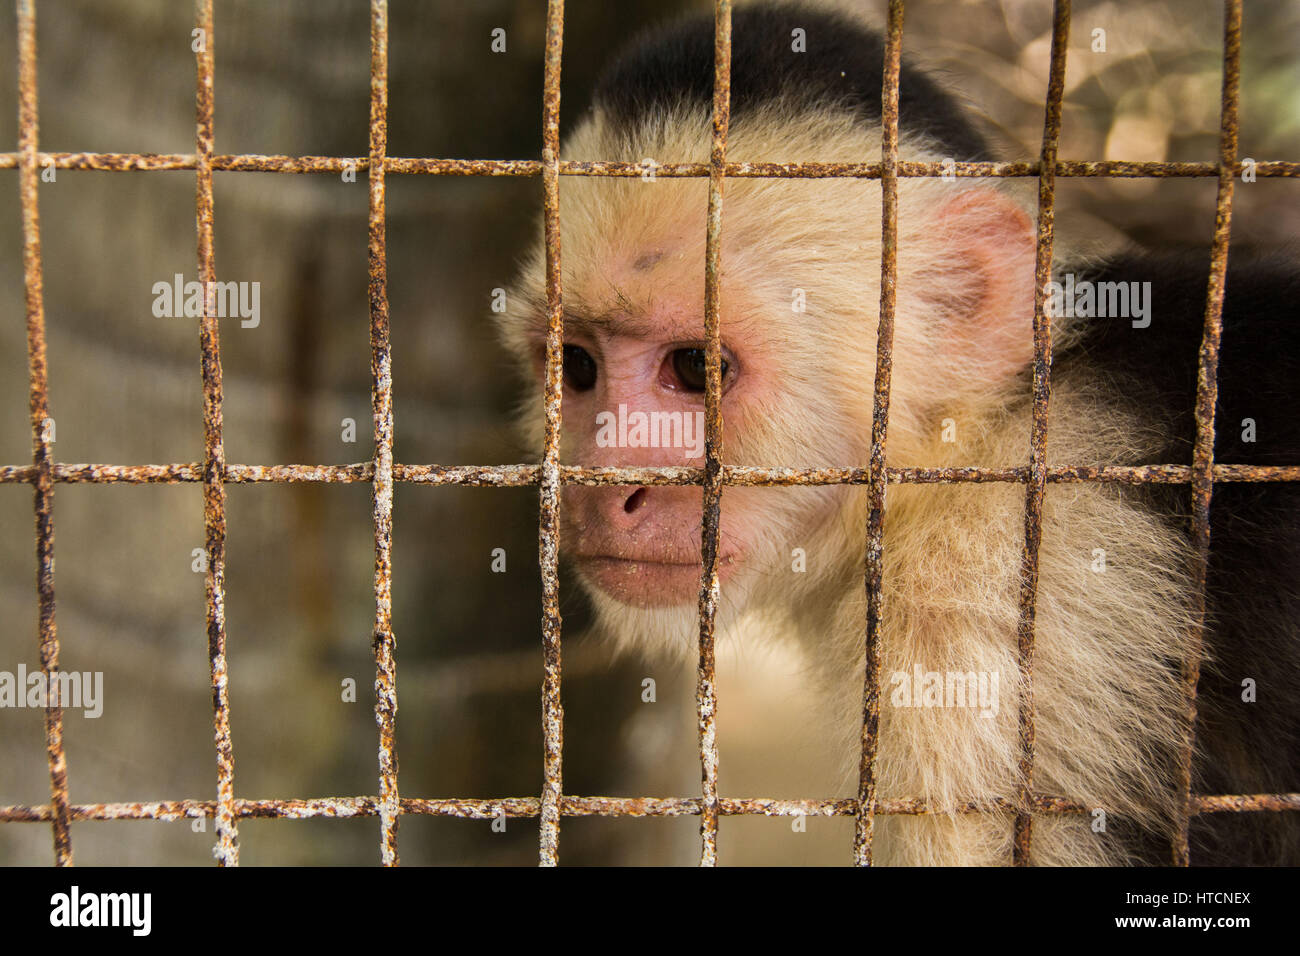 White Faced/White Headed Capuchin Monkey In Cage Stock Photo